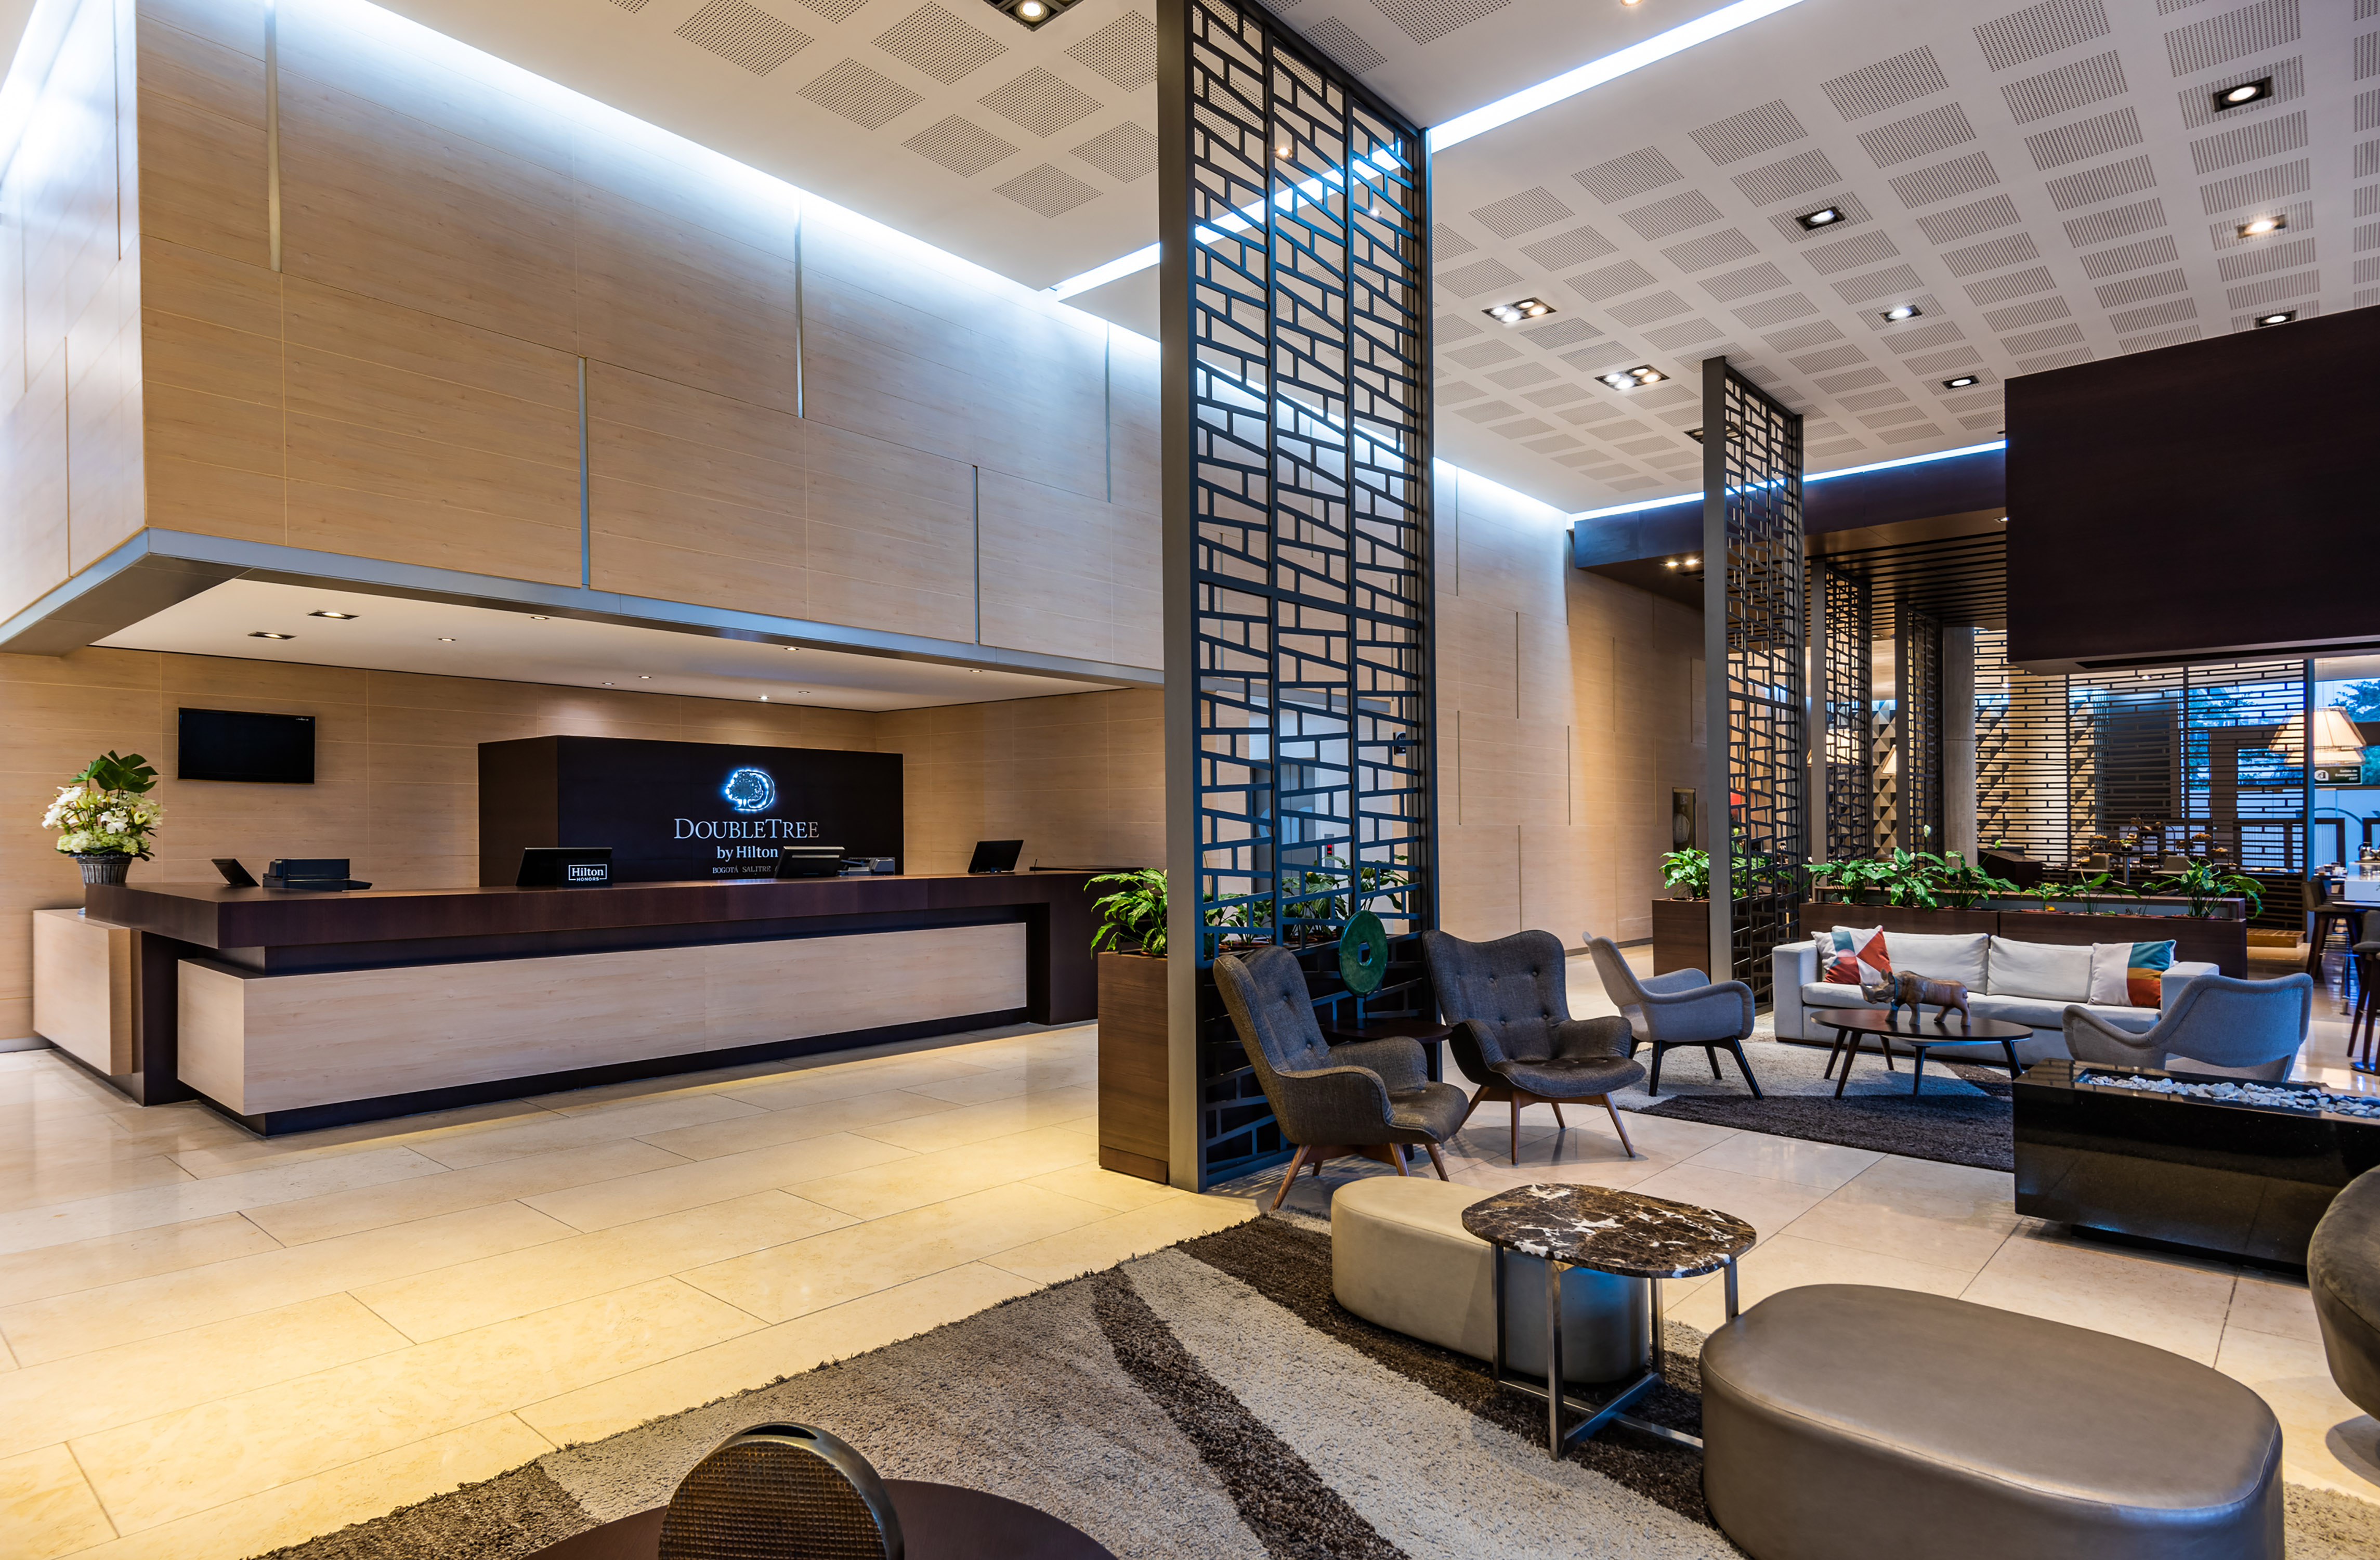 DoubleTree Hotel Reception Desk and Lobby Seating Area with HDTV